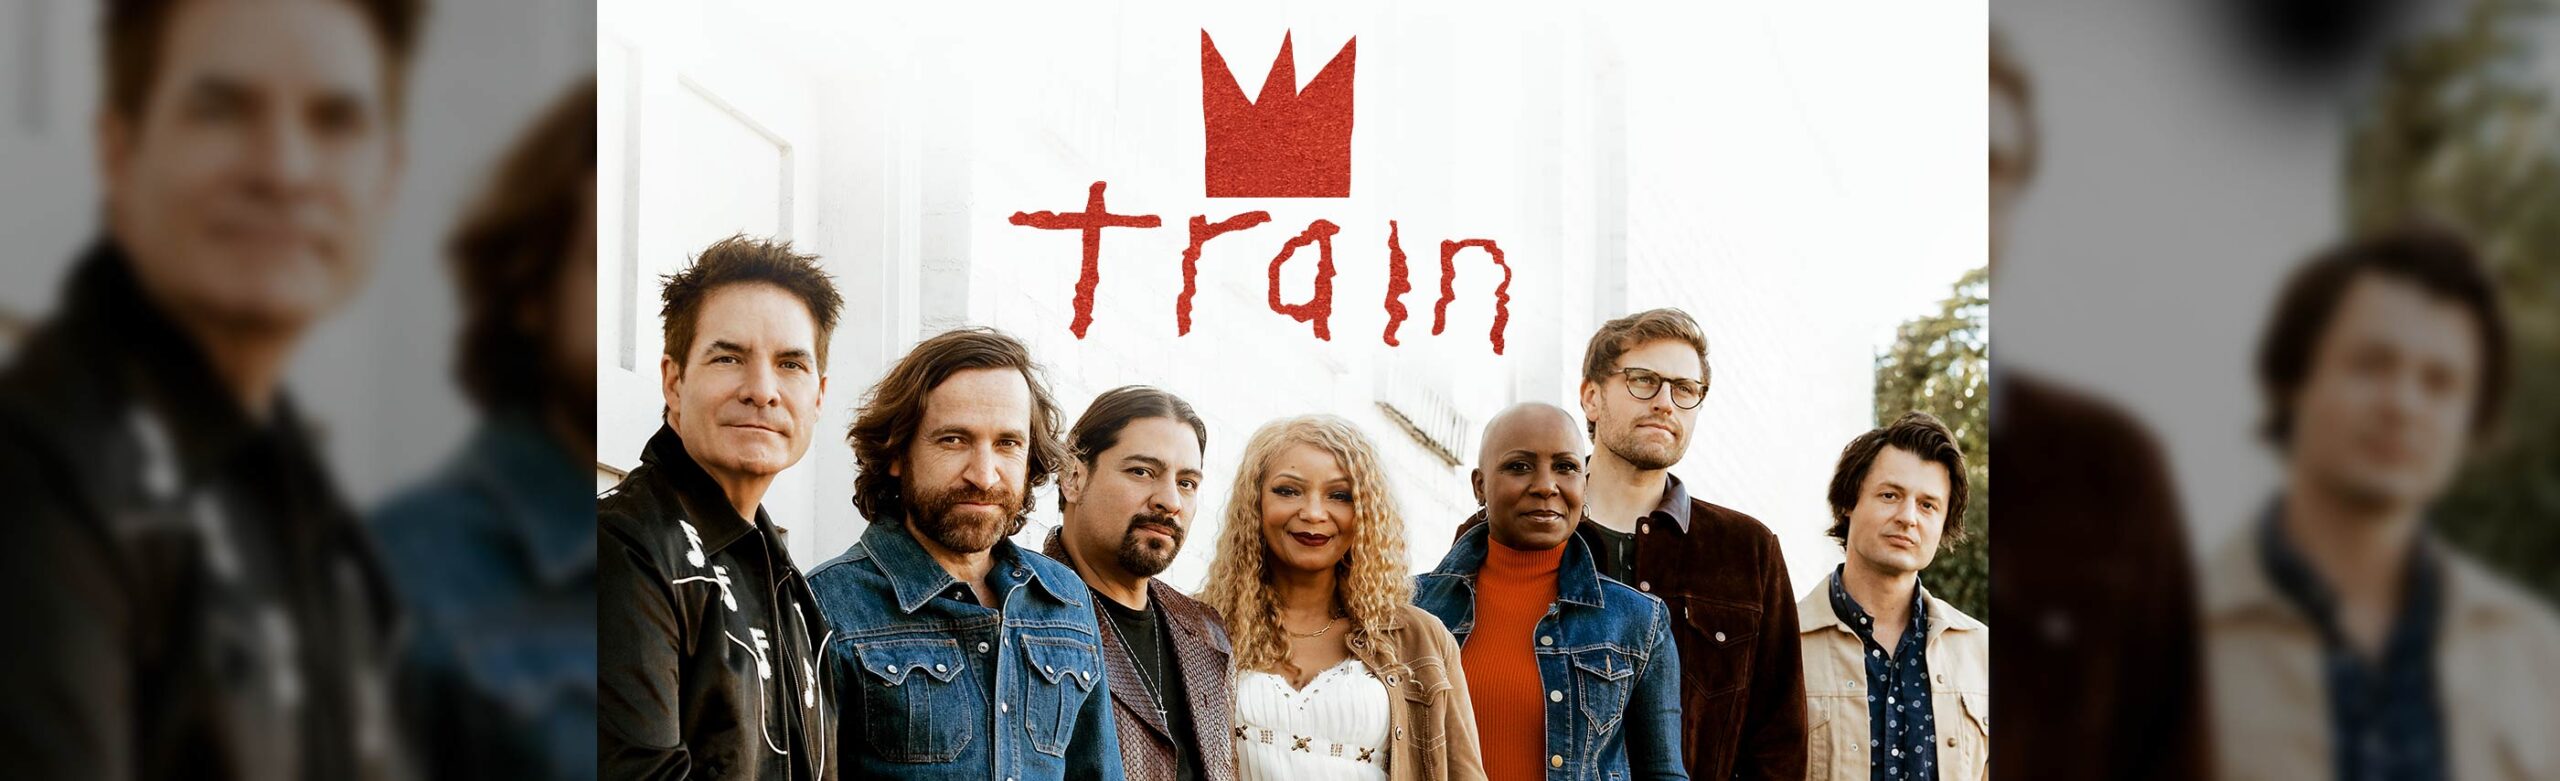 Train Confirms Concert at KettleHouse Amphitheater with Better Than Ezra Image